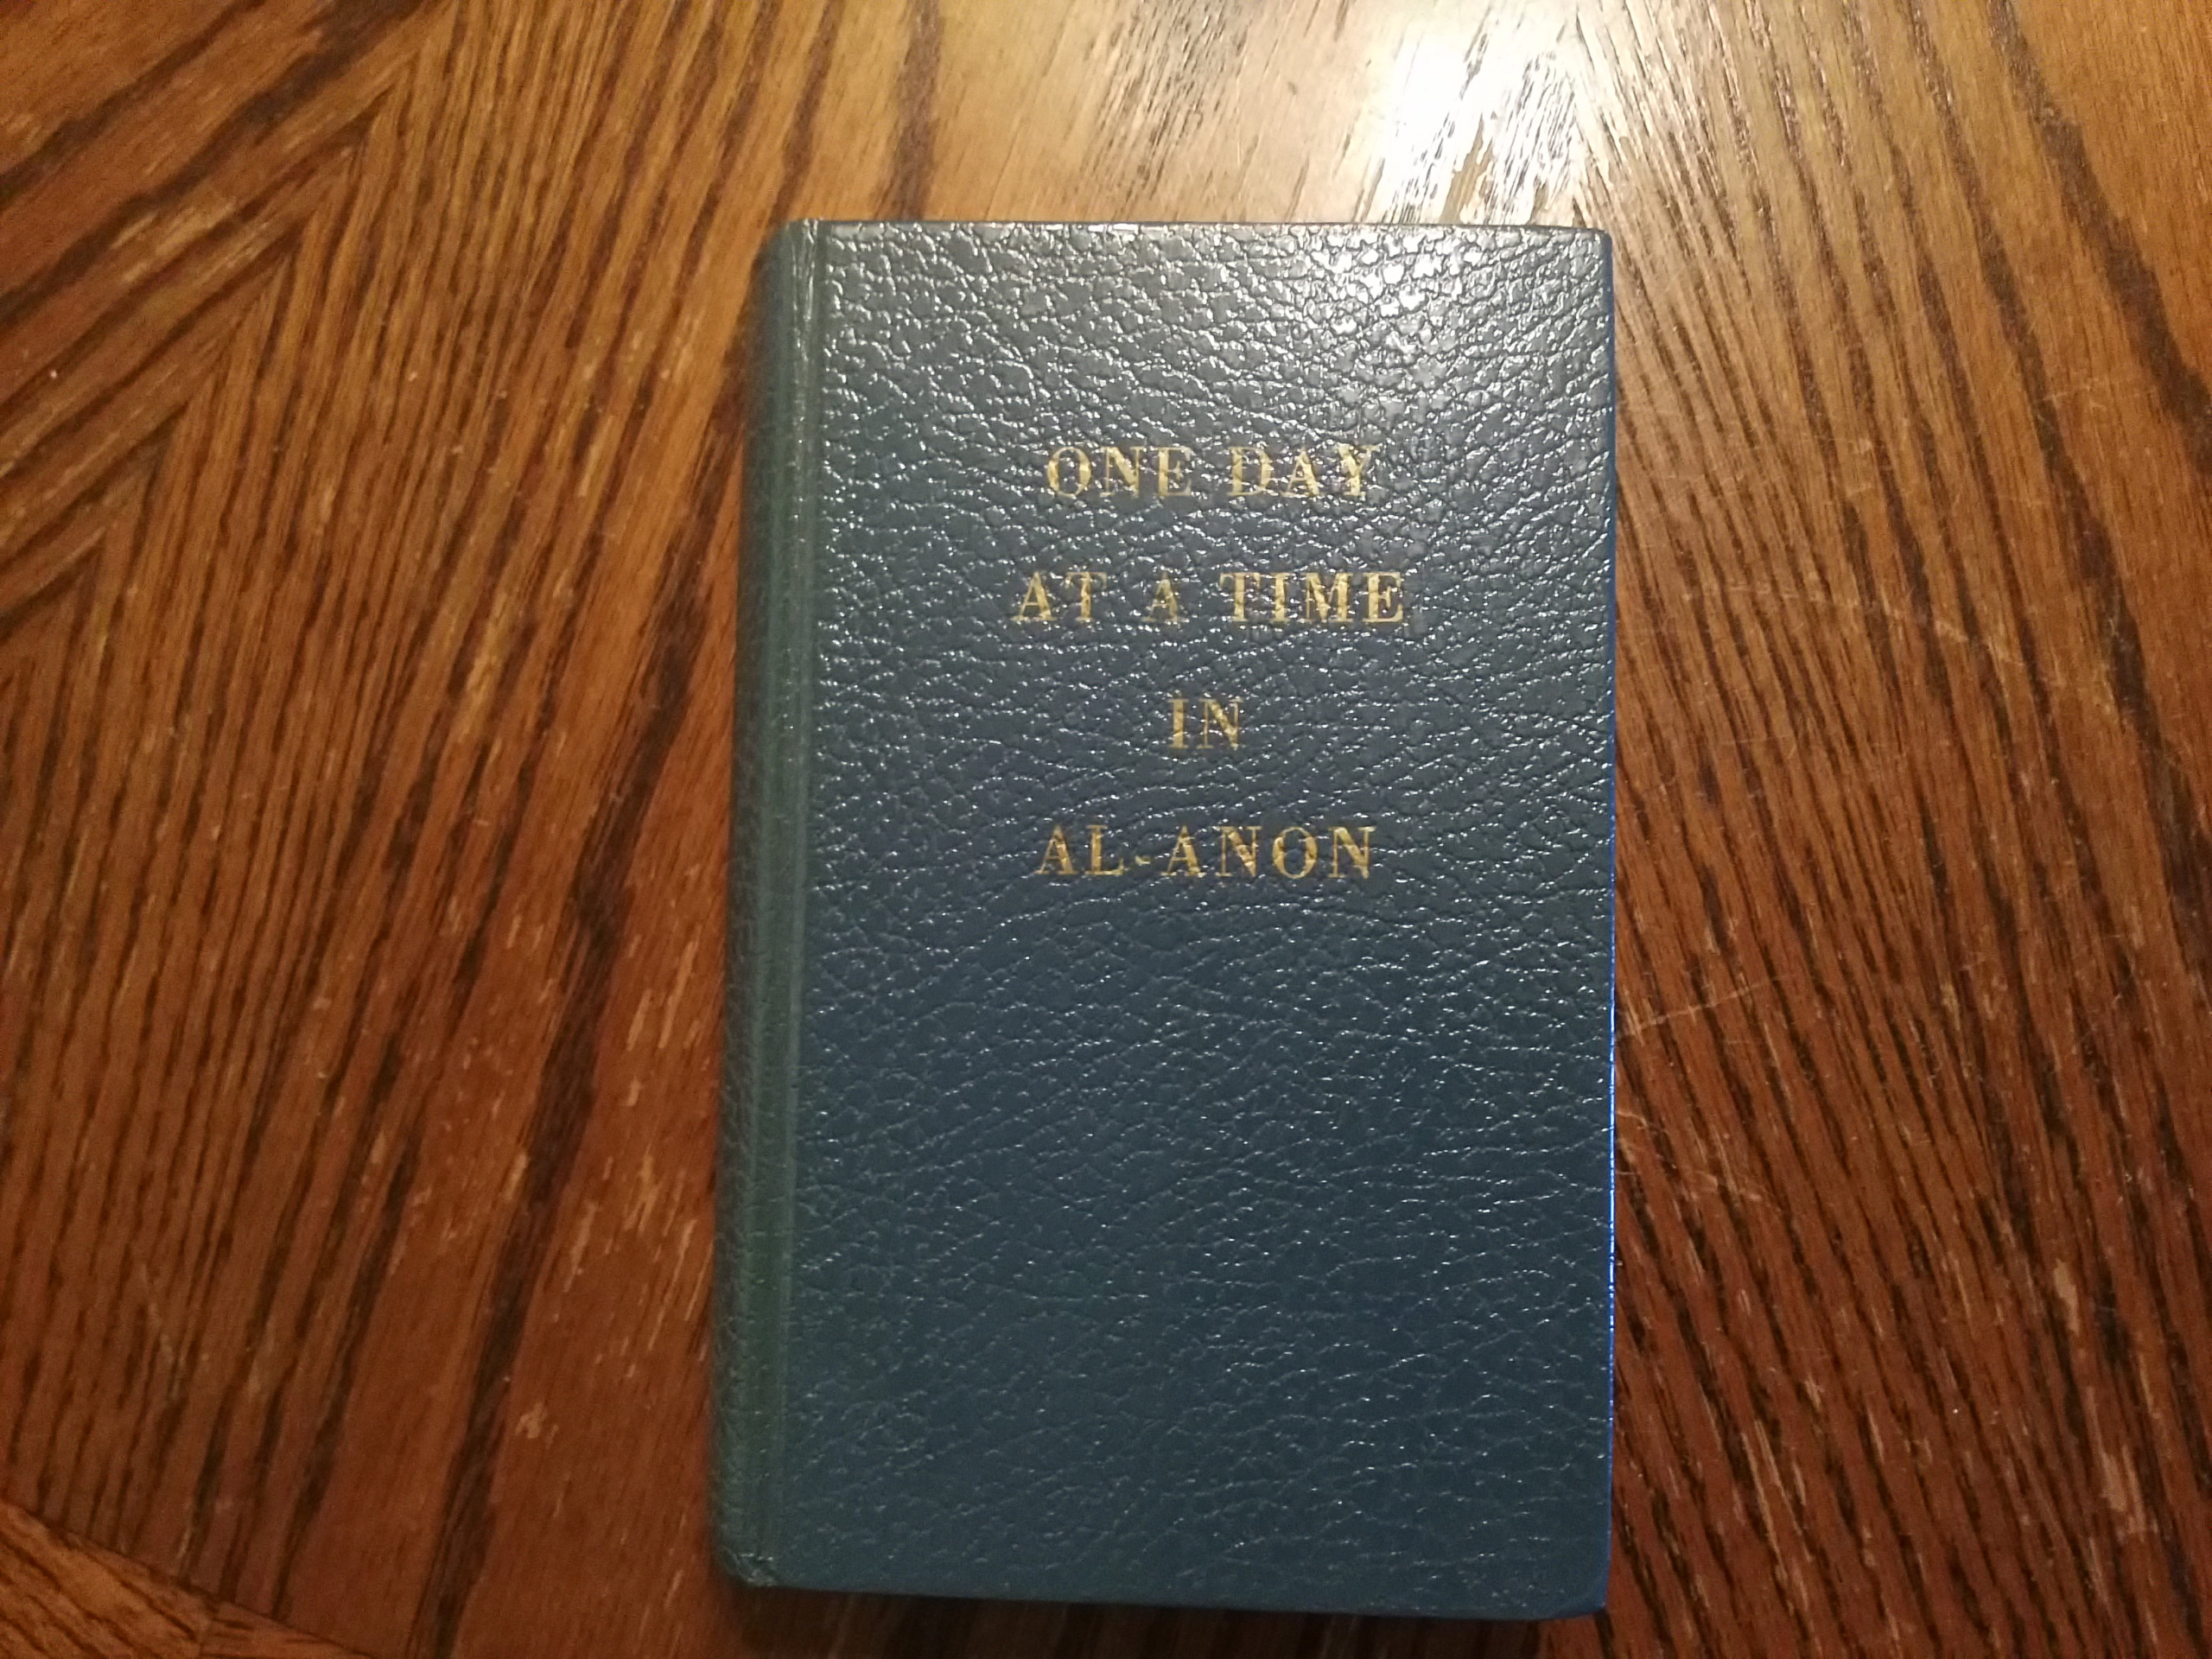 one day at a time in al-anon free download